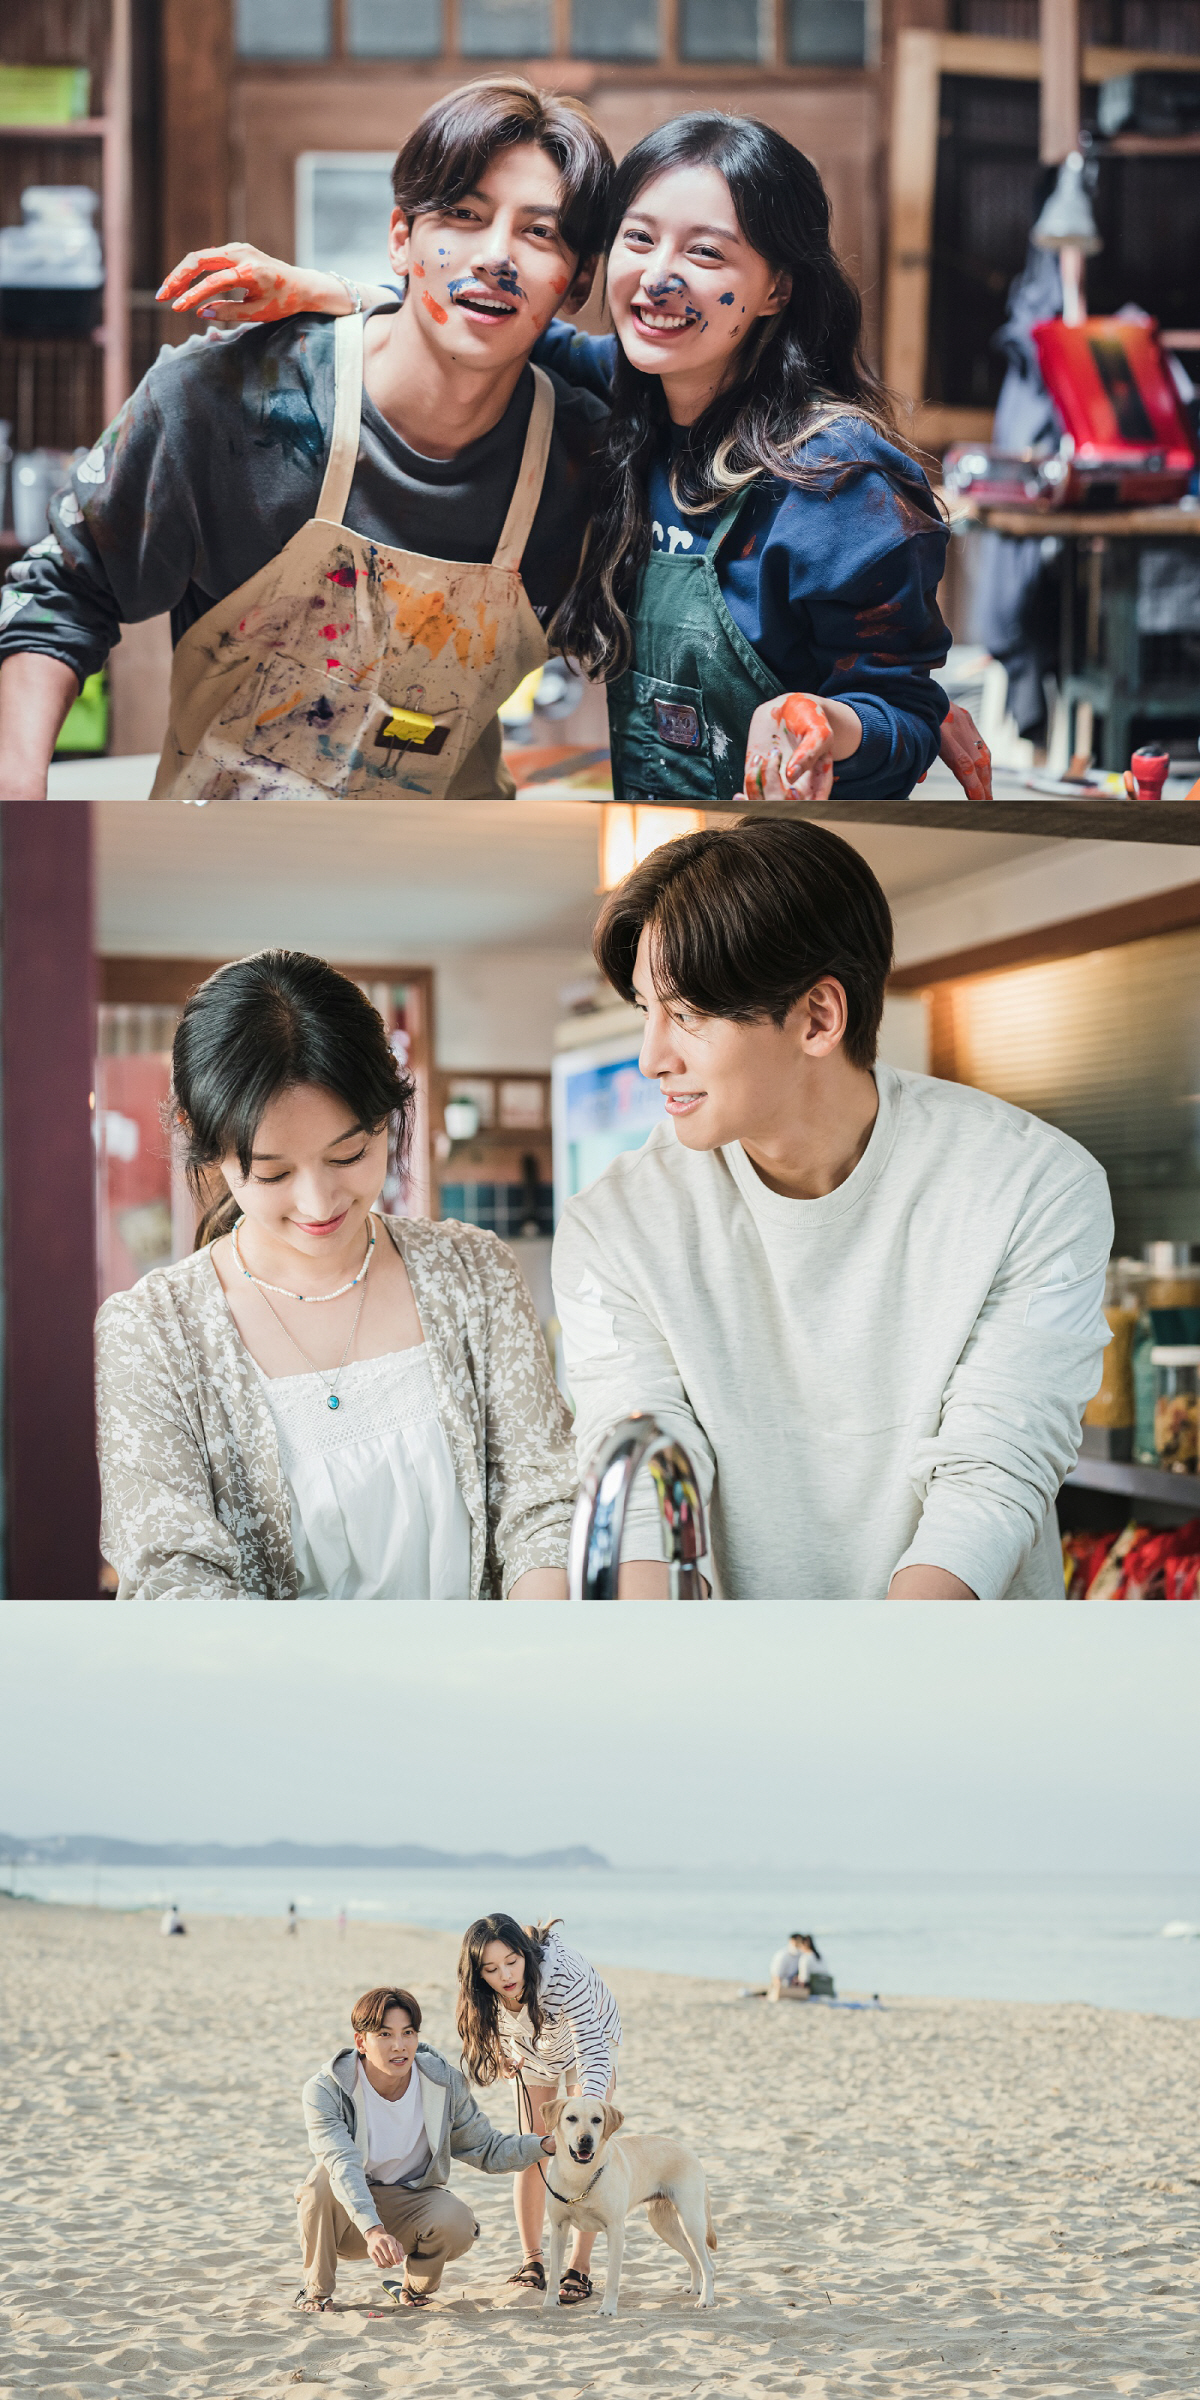 The Love of Terrace House, Ji Chang-wook and Kim Ji-won foreshadowed a hot romance.The KakaoTV OLizynal Drama Love Law of Terrace House (played by Jung Hyun-jung, directed by Park Shin-woo) will be released on December 12, and the first still cut of Park Jae-won (Ji Chang-wook) and Lee Eun-oh (Kim Ji-won) will stimulate the excitement in comfortable everyday life.The smile and warm atmosphere that resembles the two people already raise the index.Terrace Houses Love Law depicts the real romance of youths who live fiercely with another me in a complex city.It is expected that the love law, which is fast but never light, will blend with the colorful city scenery and provide a different kind of fun.The first story of Terrace Houses Love Law, which is produced as a season, opens with the subtitle My lovely camera thief.Terrace House, which dreams of another me and enjoys the deviation of pureness in search of happiness and love.The steam Love Dam, who knows how to confront their lives more honestly and actively than anyone else, inspires empathy.Above all, the meeting of the production team of Romance Dream Team is heating up the expectations of the drama fans.Director Park Shin-woo, who showed sensual and sophisticated production through Psycho but its okay and Avatar of jealousy, and Jeong Hyun-jungs collaboration with the series I need romance, Discovery of Love and Romance is a separate bookIt is expected to be the birth of life romance, which is a combination of realistic and emotional dialogue and delicate production.Here, the meeting of Ji Chang-wook and Kim Ji-won is also raising the topic.In the hot interest, the photo of the veil was taken off with the image of two people who create romance narrative just by being together.Park Jae Won and Lee Eun-ohs happy once in love tickles the hearts of viewers.From playful to lovely eyes, the special chemistry of those who will fill the romance that came like a dream raises expectations.Park Jae-won and Lee Eun-oh, who enjoy the present happiness and love, spread sweet energy around the two people who seem to concentrate on each other.The picturesque appearance of those who charge the excitement adds to the fateful romance that started by chance.Park Jae-won, a passionate architect played by Ji Chang-wook, is a romanticist who knows how to love and love.A person who can not forget her camera thief (?) who took her mind a year ago and disappeared like a dream of a midsummer night.Kim Ji-won played the role of a charming and lovely freelance marketer Lee Eun-oh.Bonka Lee Eun-oh is usually a woman, but Bukka is a full-fledged free soul Yoon Sun-ah. Lee Eun-oh falls in love with Park Jae-won as a different person in a strange place that has left impulsively.Park Jae Won and Lee Eun-oh, who have various charms, met with Romance Artisan Ji Chang-wook and Kim Ji-won and got vitality.This is why I am more looking forward to the Love Law of Terrace House, which is something that anyone can sympathize with.The Love Law of Terrace House production team said, Actors who make the charm of Character meet.I hope that the synergy of Ji Chang-wook and Kim Ji-won will bring a certain excitement, he said. The romance of two honest and hot men and women will capture viewers with unique emotions and reality empathy.On the other hand, KakaoTV OLizzyn Drama Love Law of Terrace House is produced by writing and drawings that plan and produce Misty and Romance is a separate book appendix.